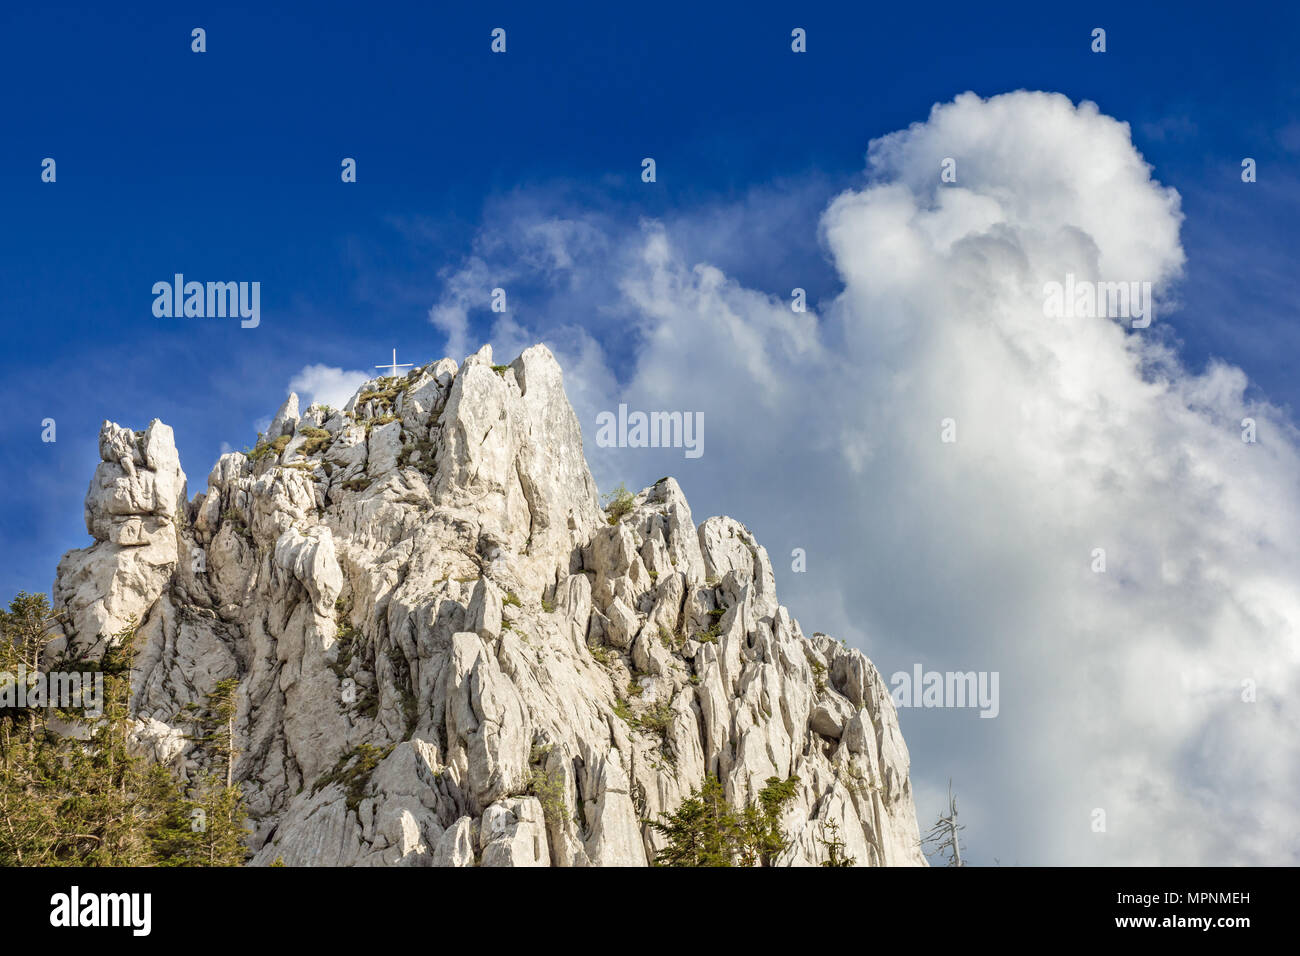 Mountain top with summit cross, with clouds building up in the background. Taken along Via Dinarica, in strict nature reserve Bijele stijene, Croatia. Stock Photo